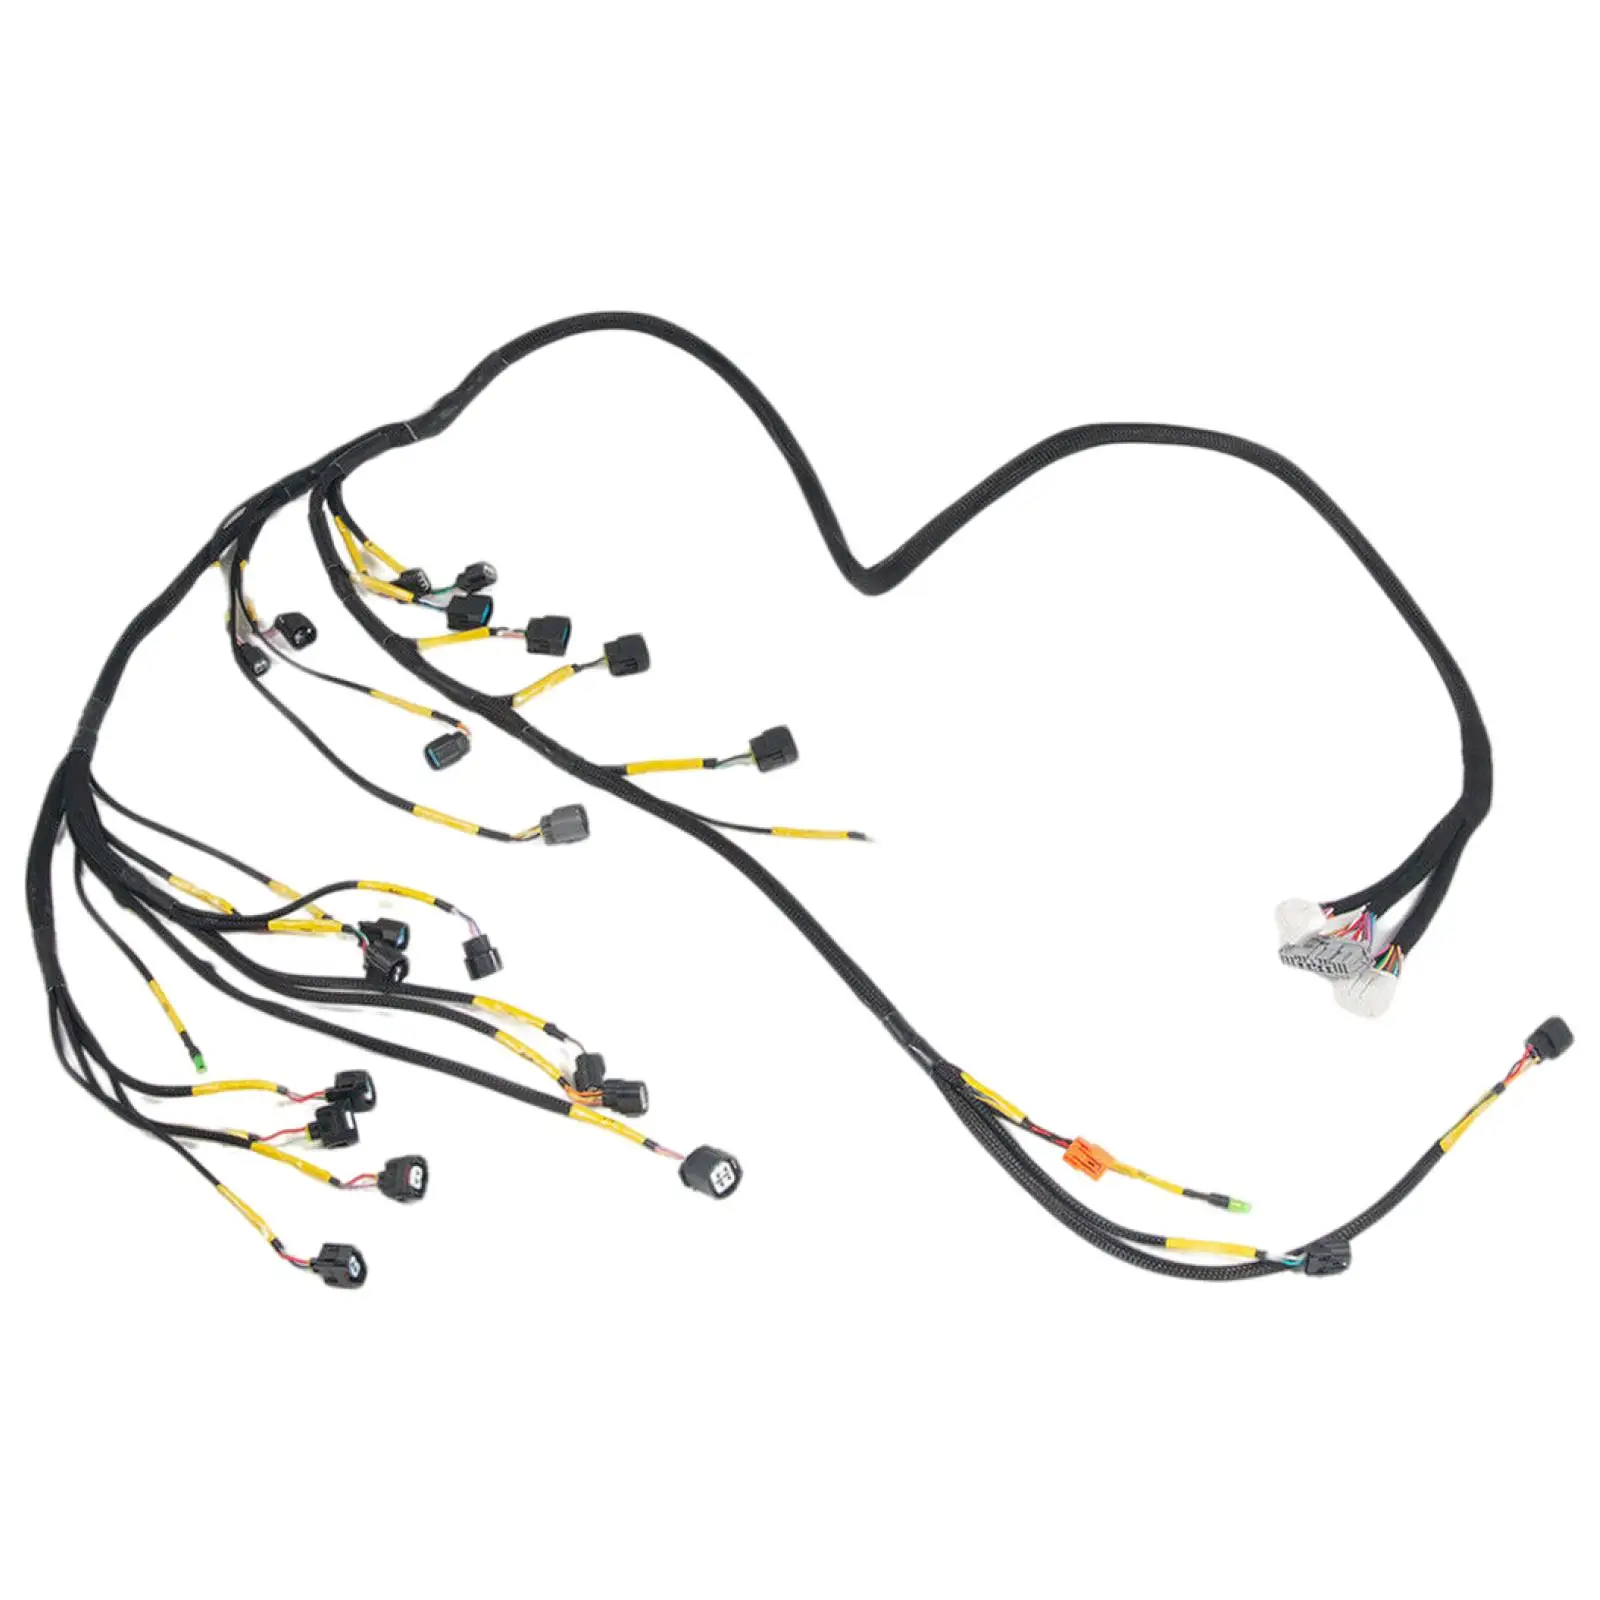 K20 K24 K Series Tucked Engine Harness Fits for Honda K Swap for RSX Type S for RSX Base